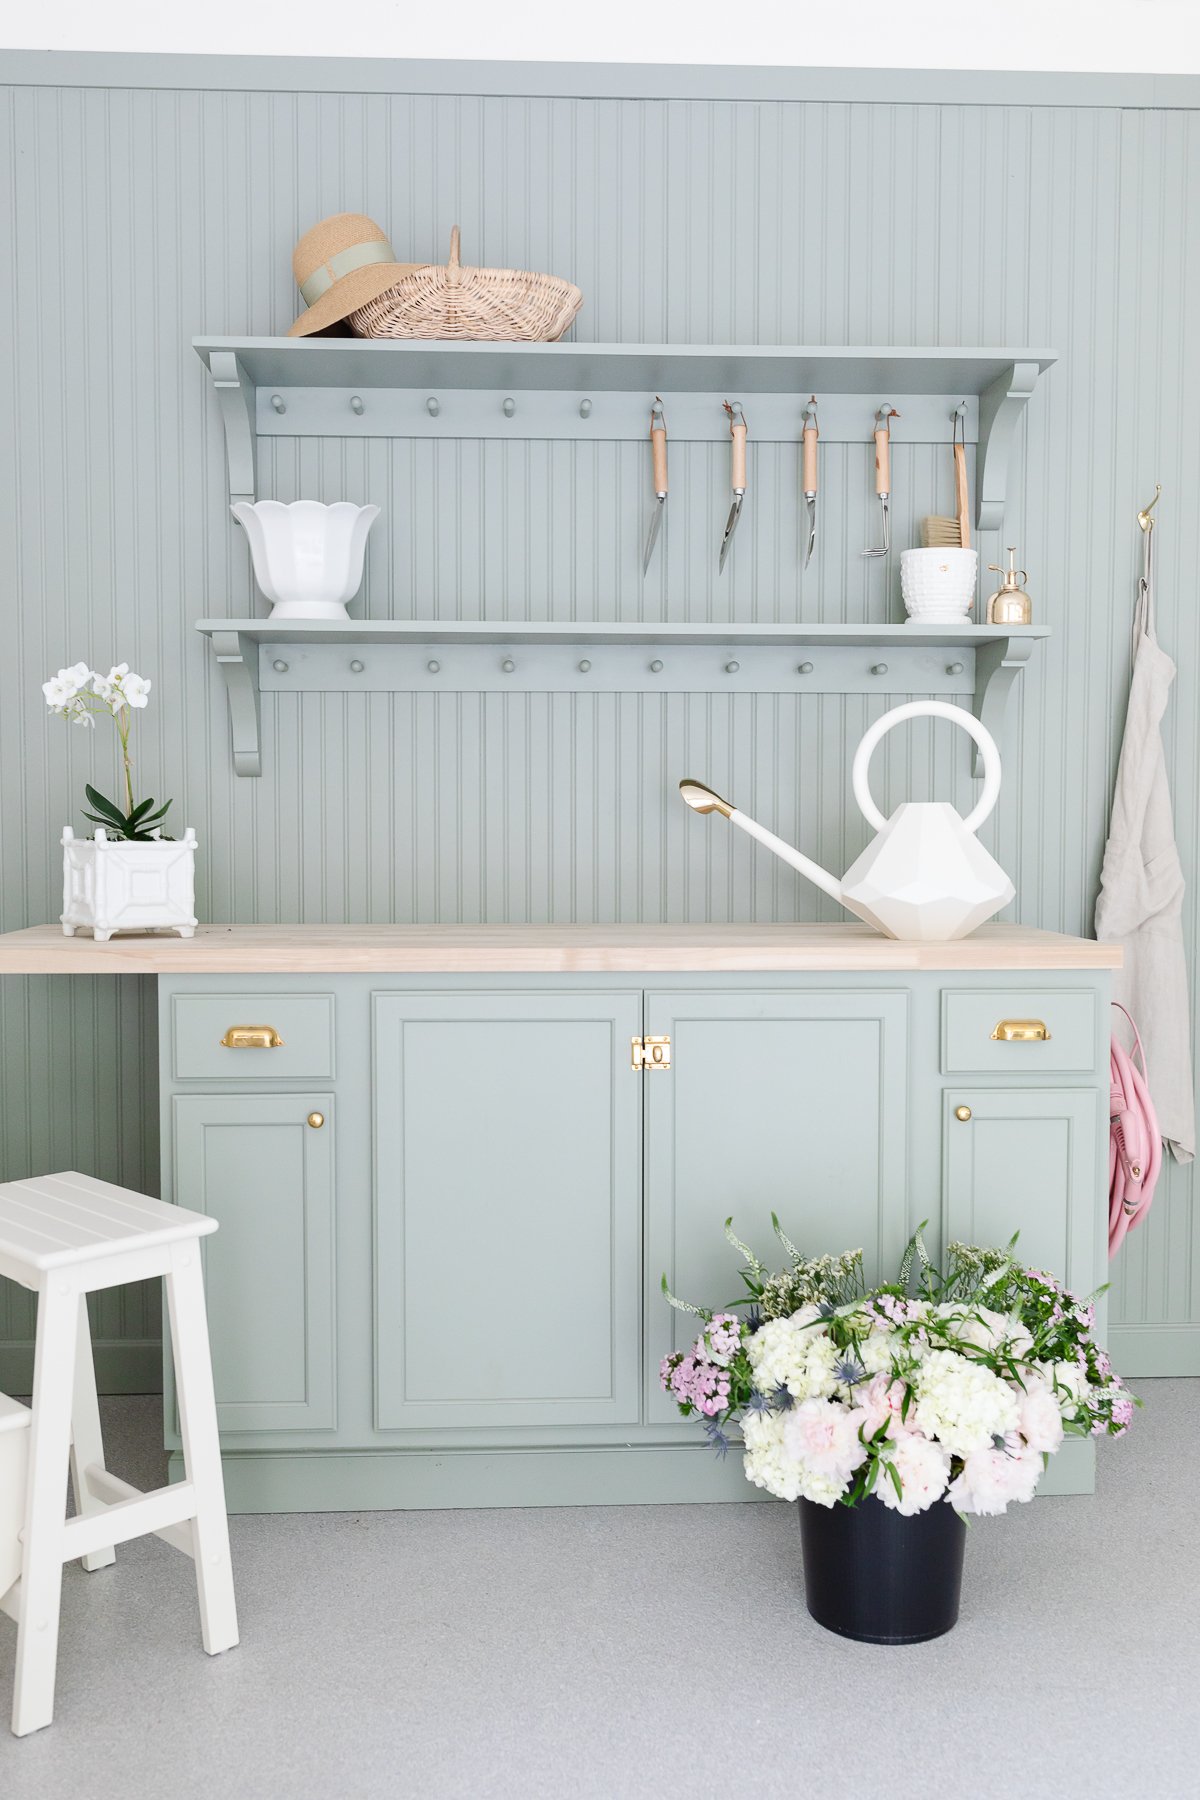 A green potting bench area with beadboard on the walls